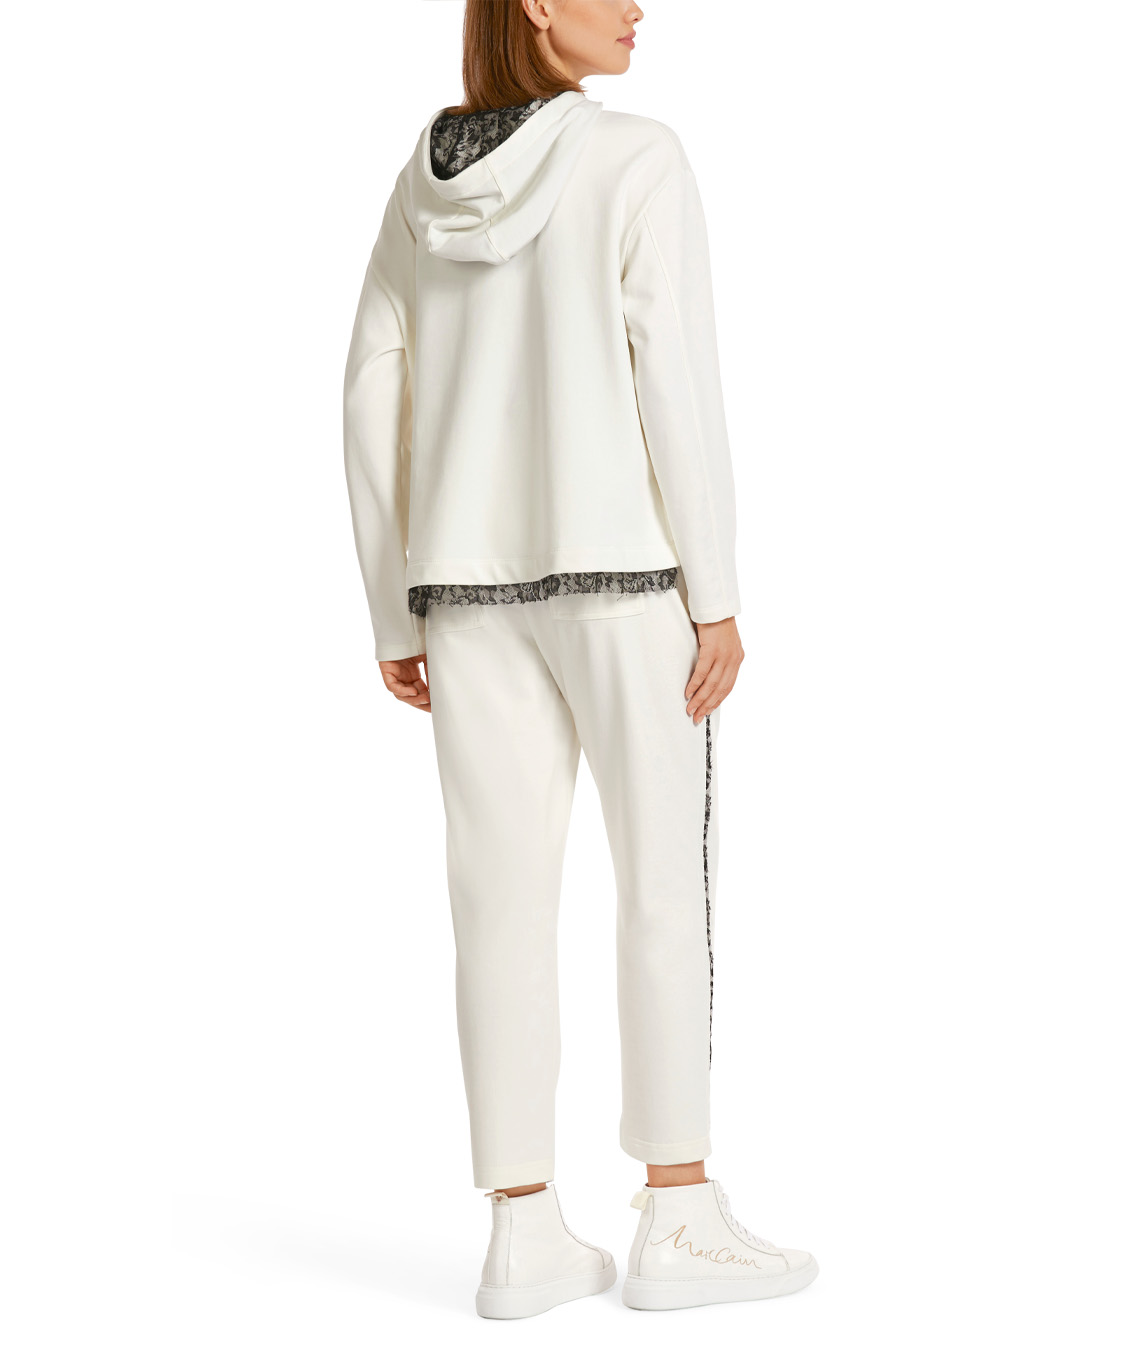 Marccain Sport Pullover Us 44.11 J73 Off White